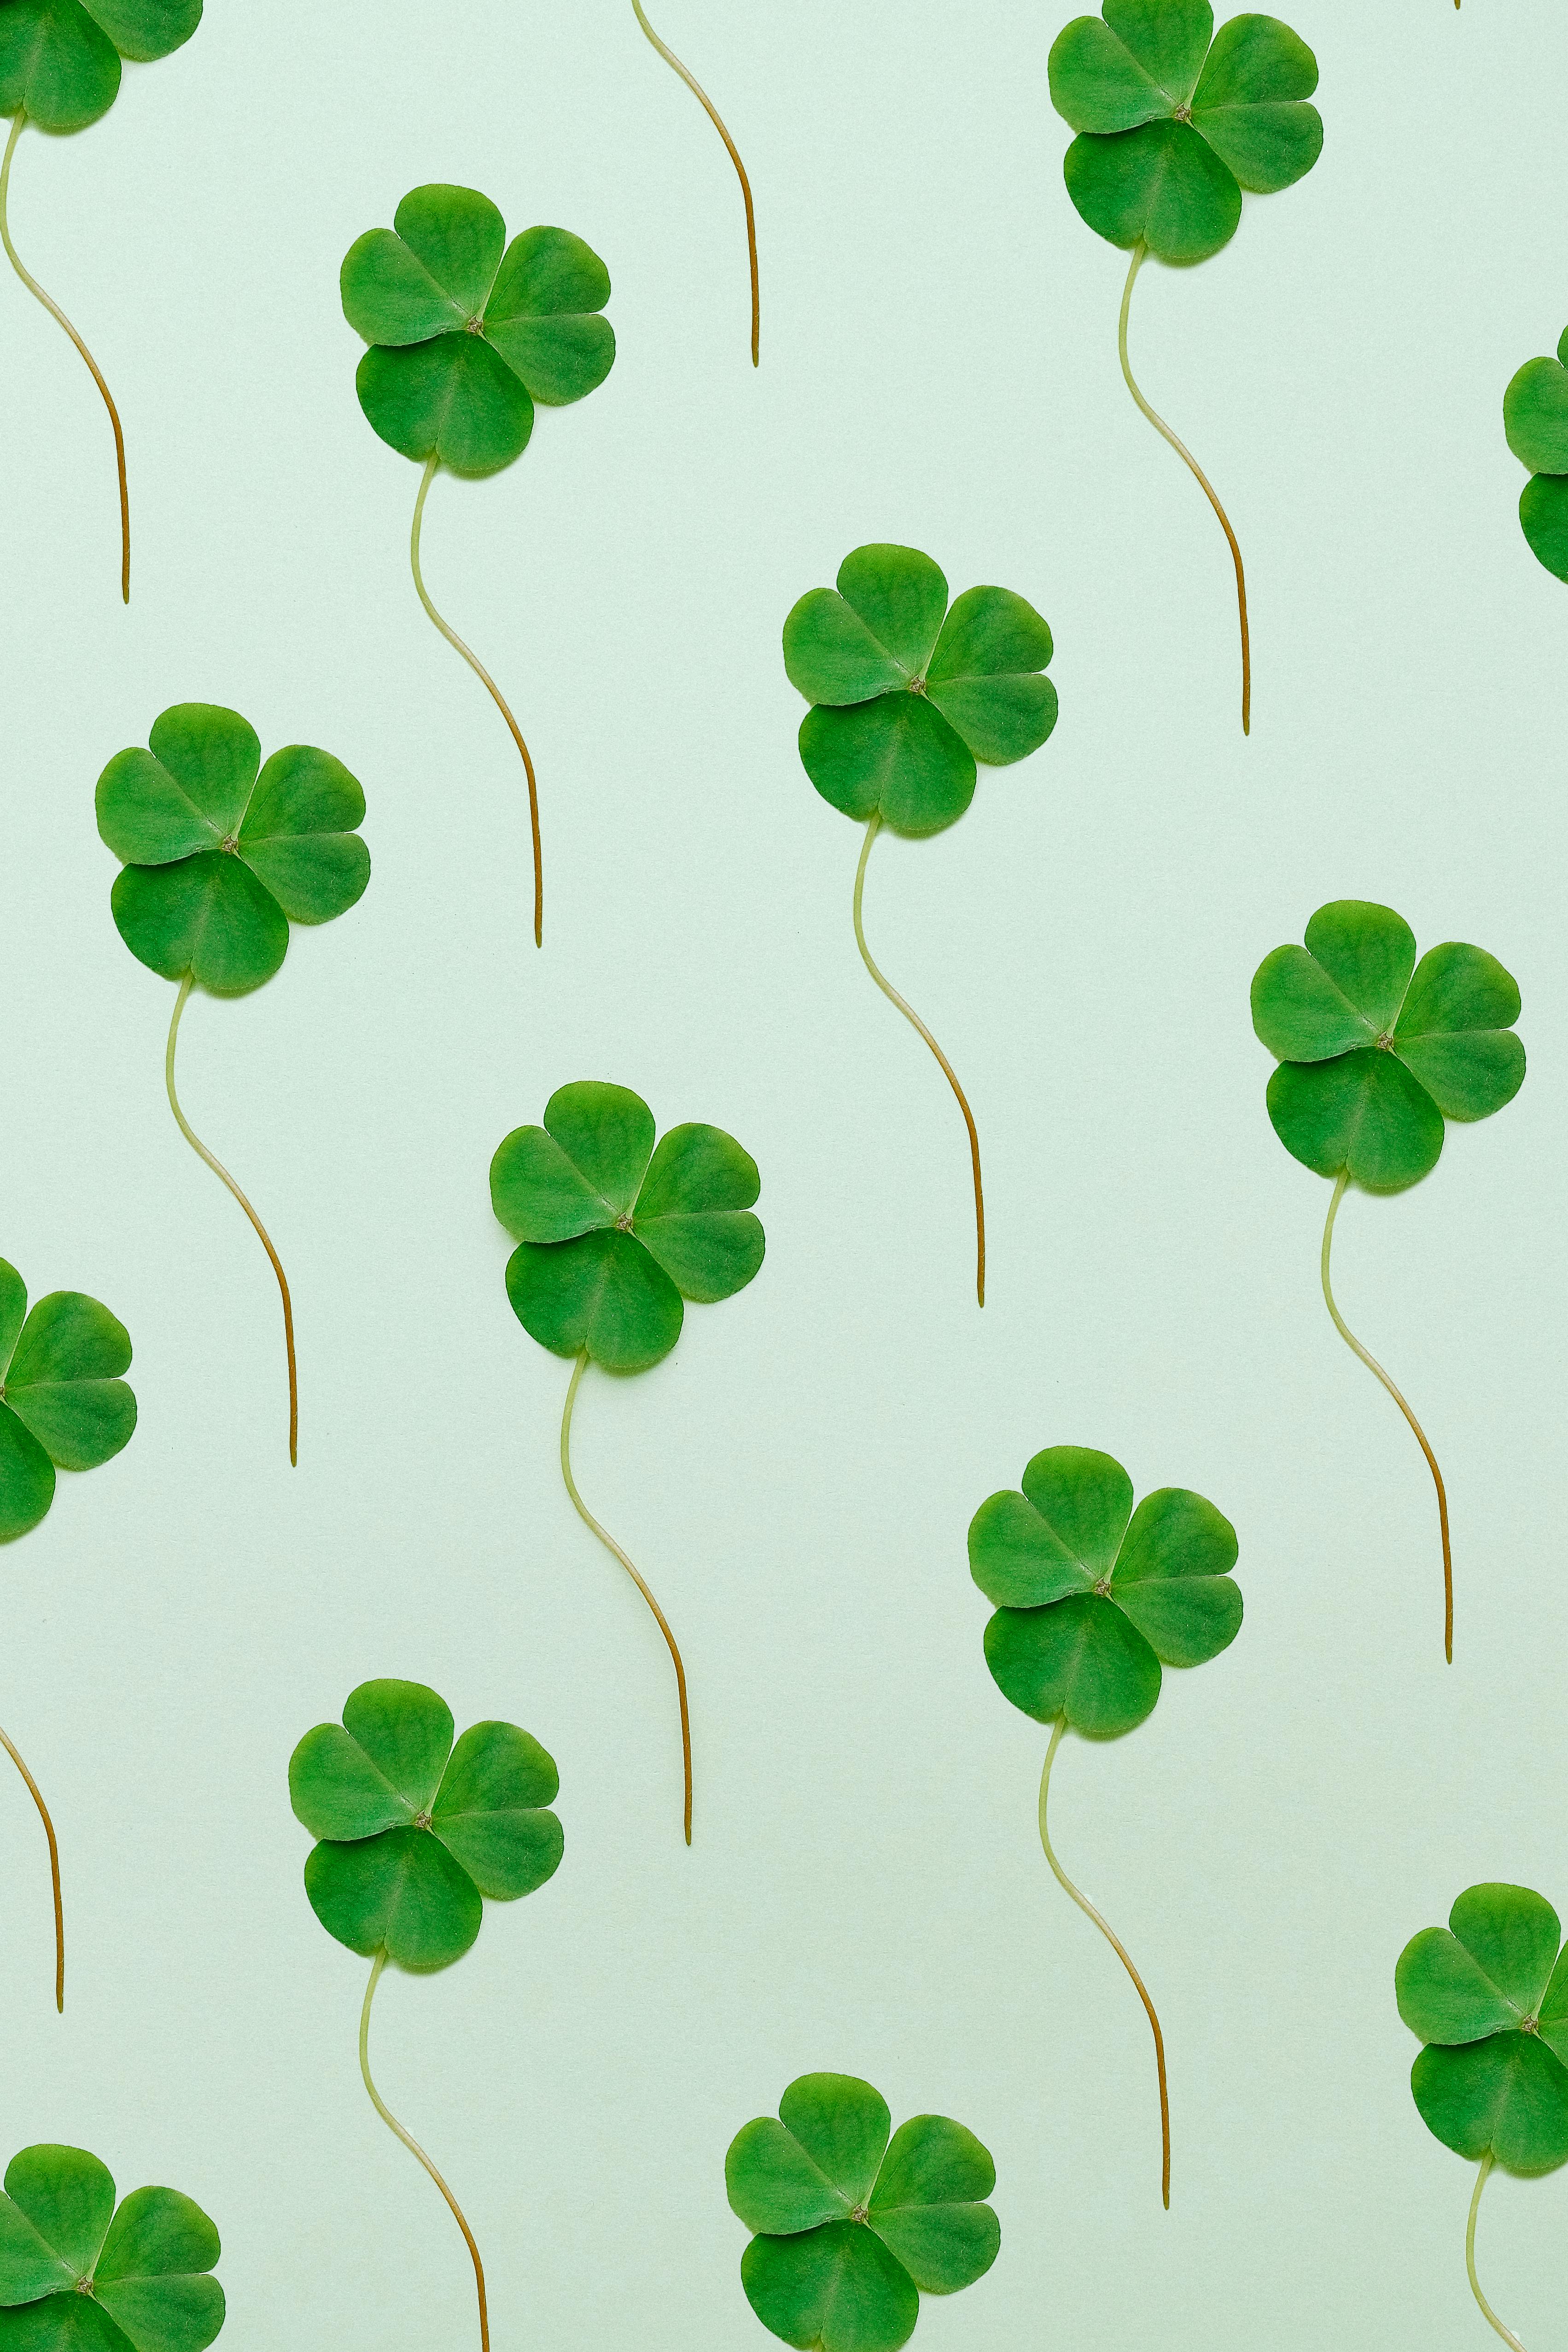 Saint patricks day wallpapers HD  Download Free backgrounds